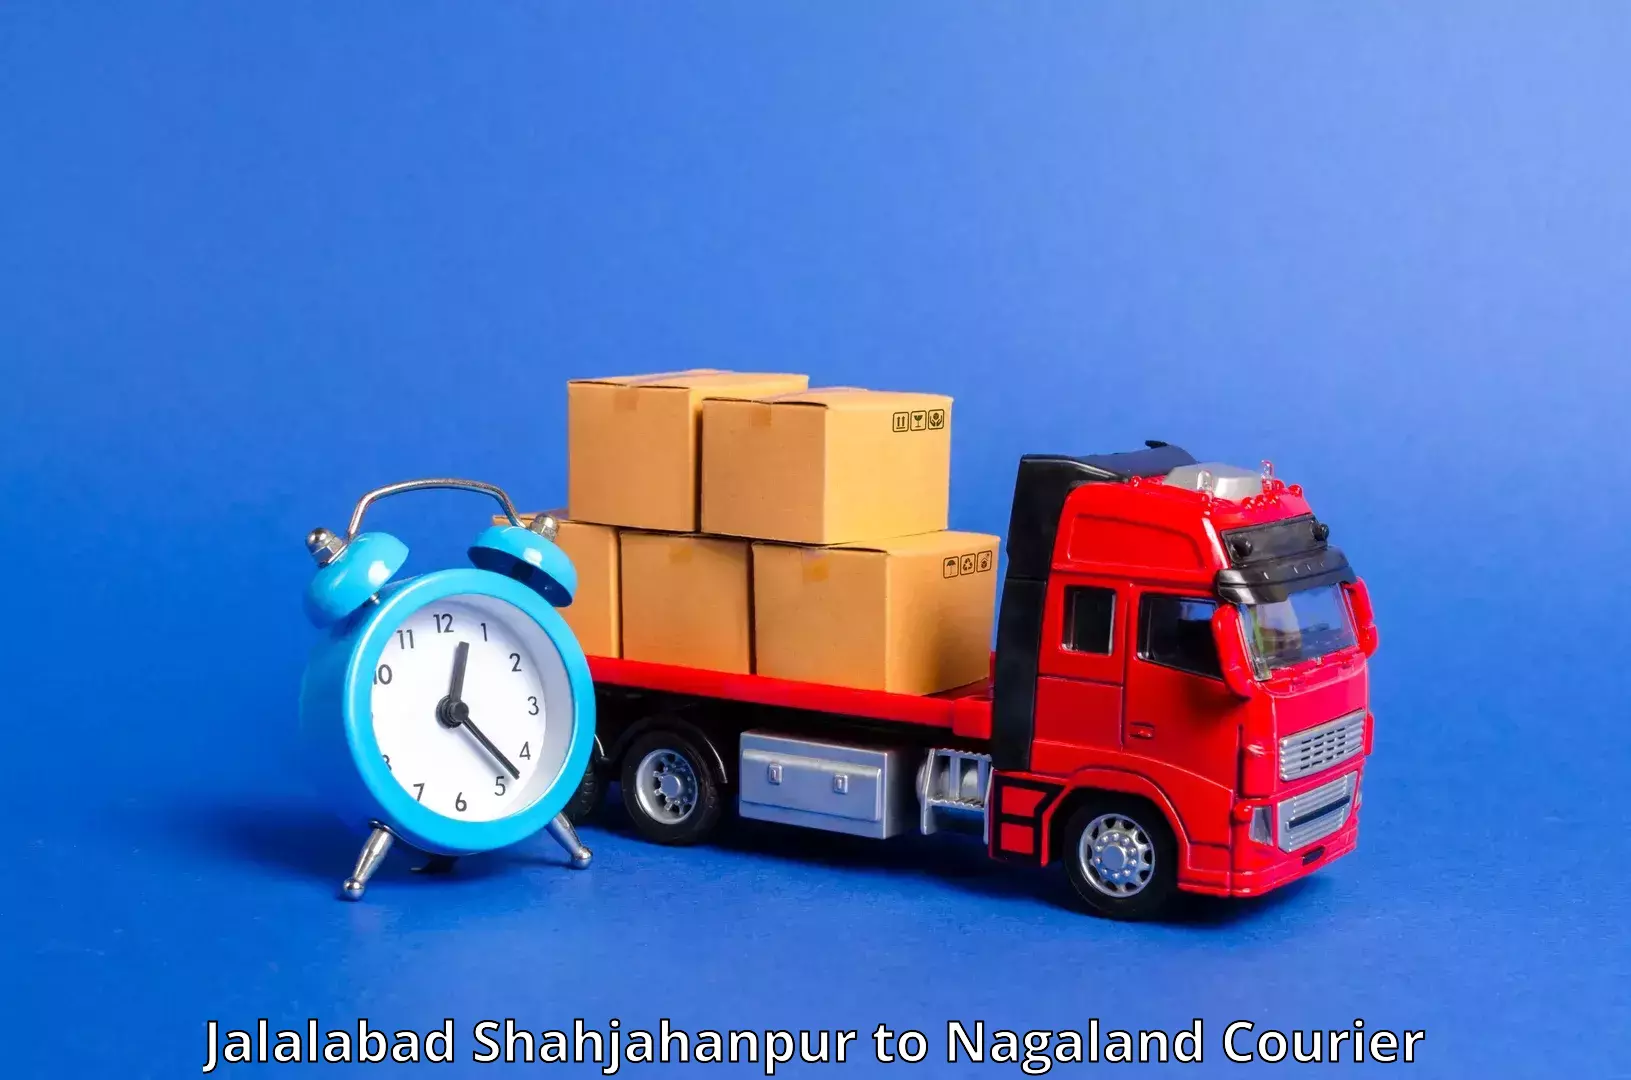 24-hour courier service Jalalabad Shahjahanpur to Mon